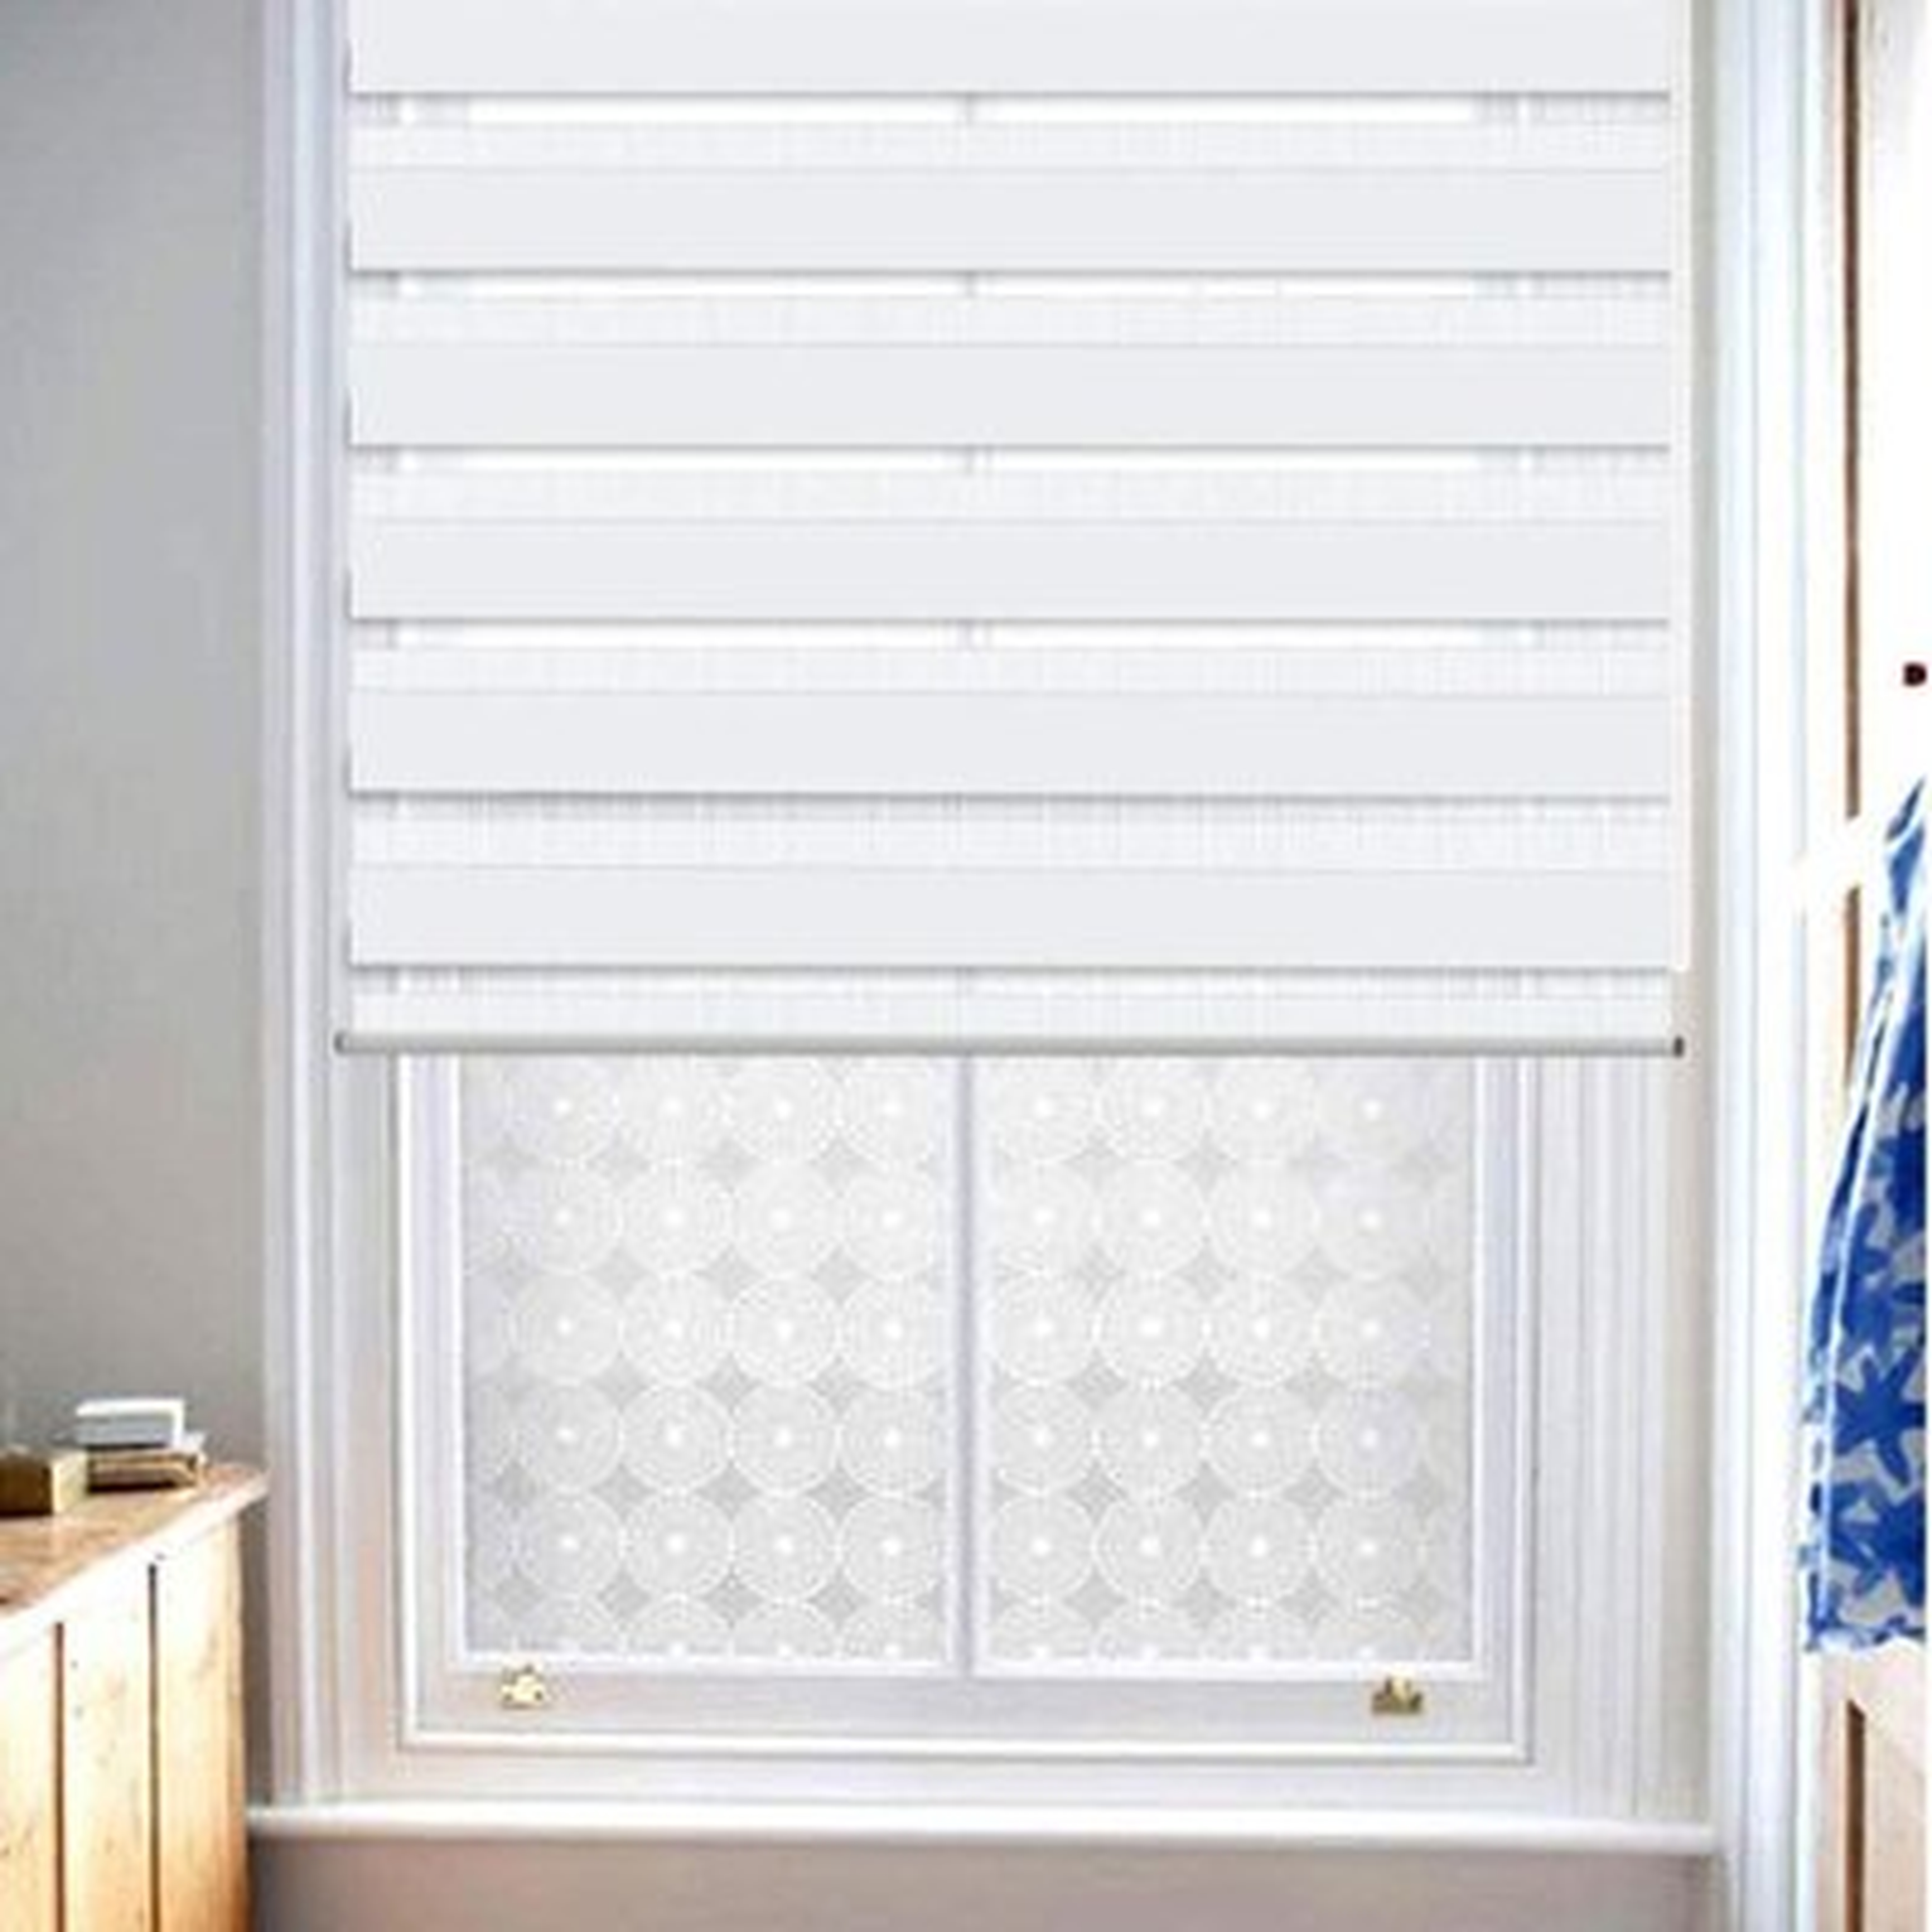 Horizontal Window Shade Blind Zebra Dual Roller Blinds Day And Night Blinds Curtains,Easy To Install(2 Pack) - Wayfair